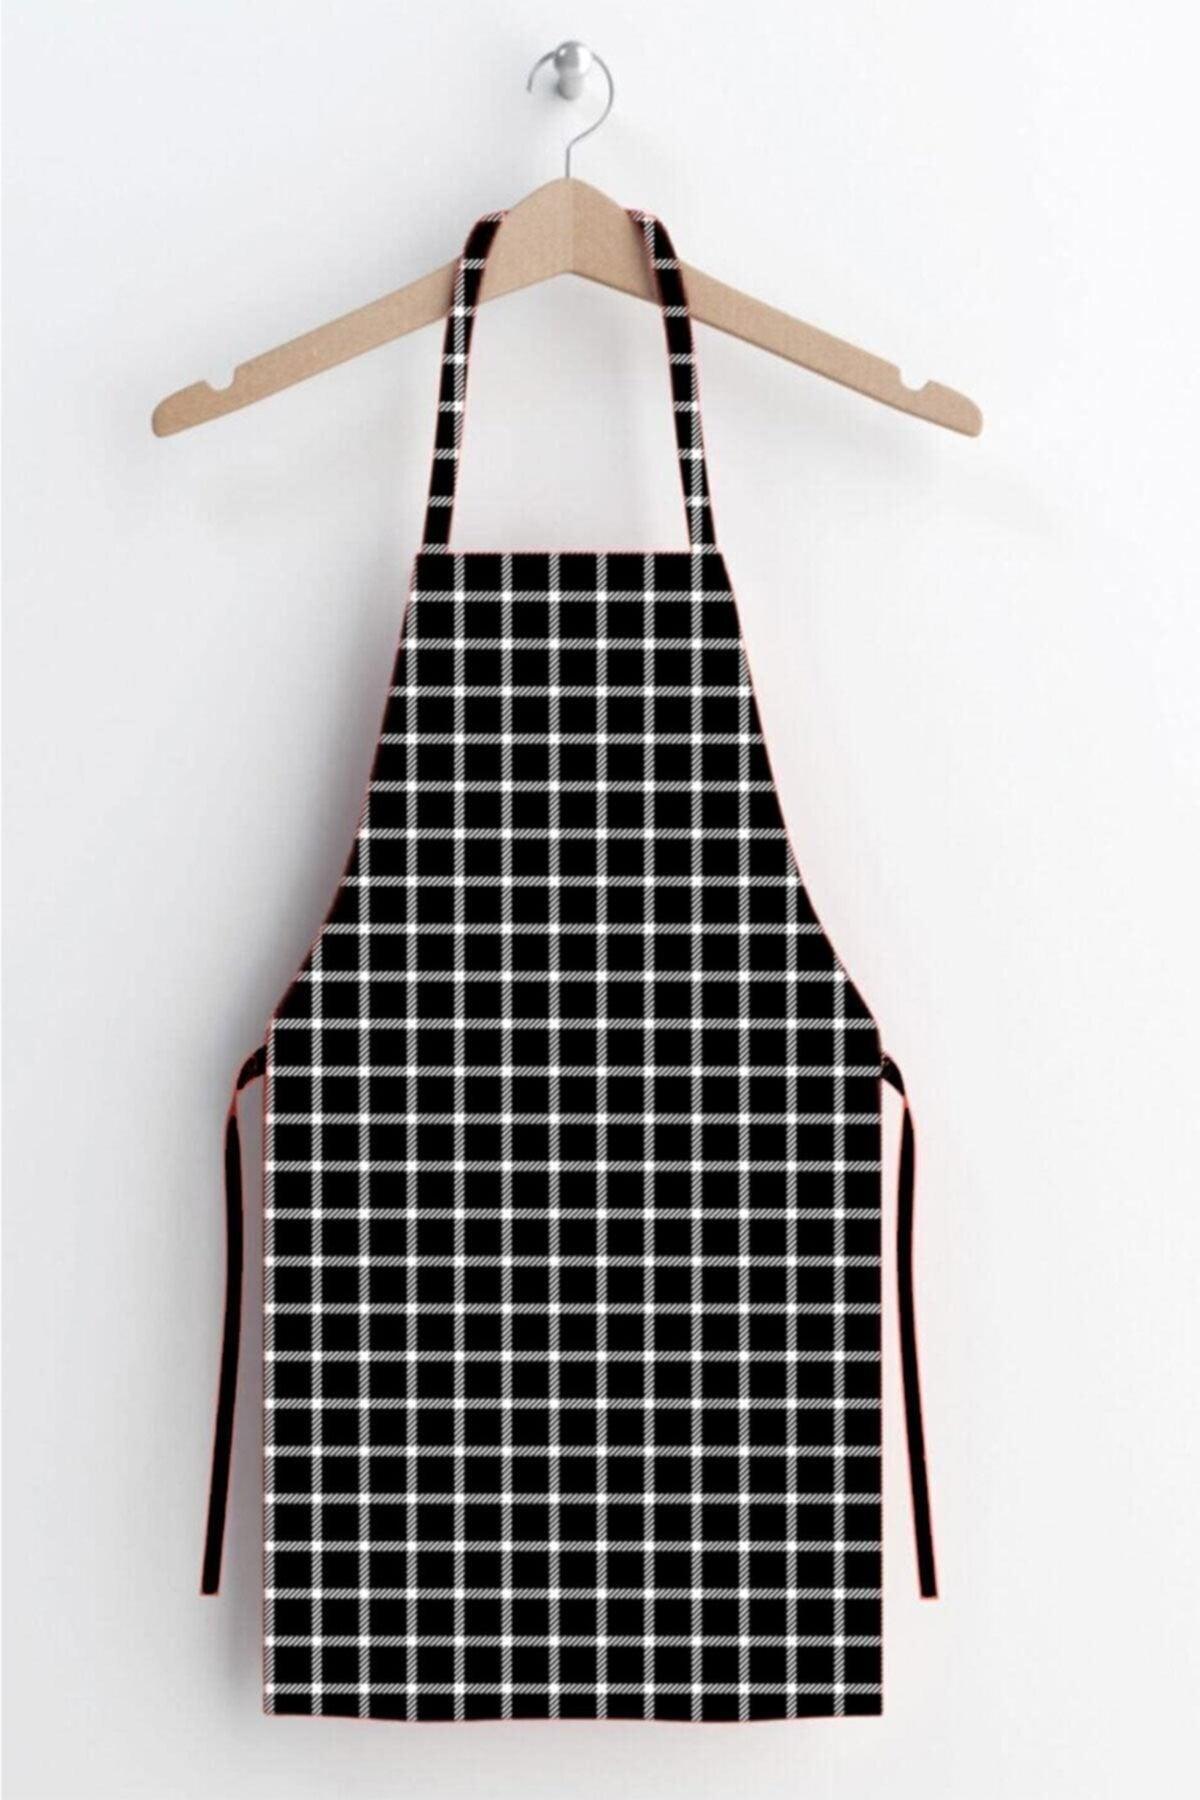 Black Checkered Pattern Stain Resistant Fabric Kitchen Apron - Swordslife